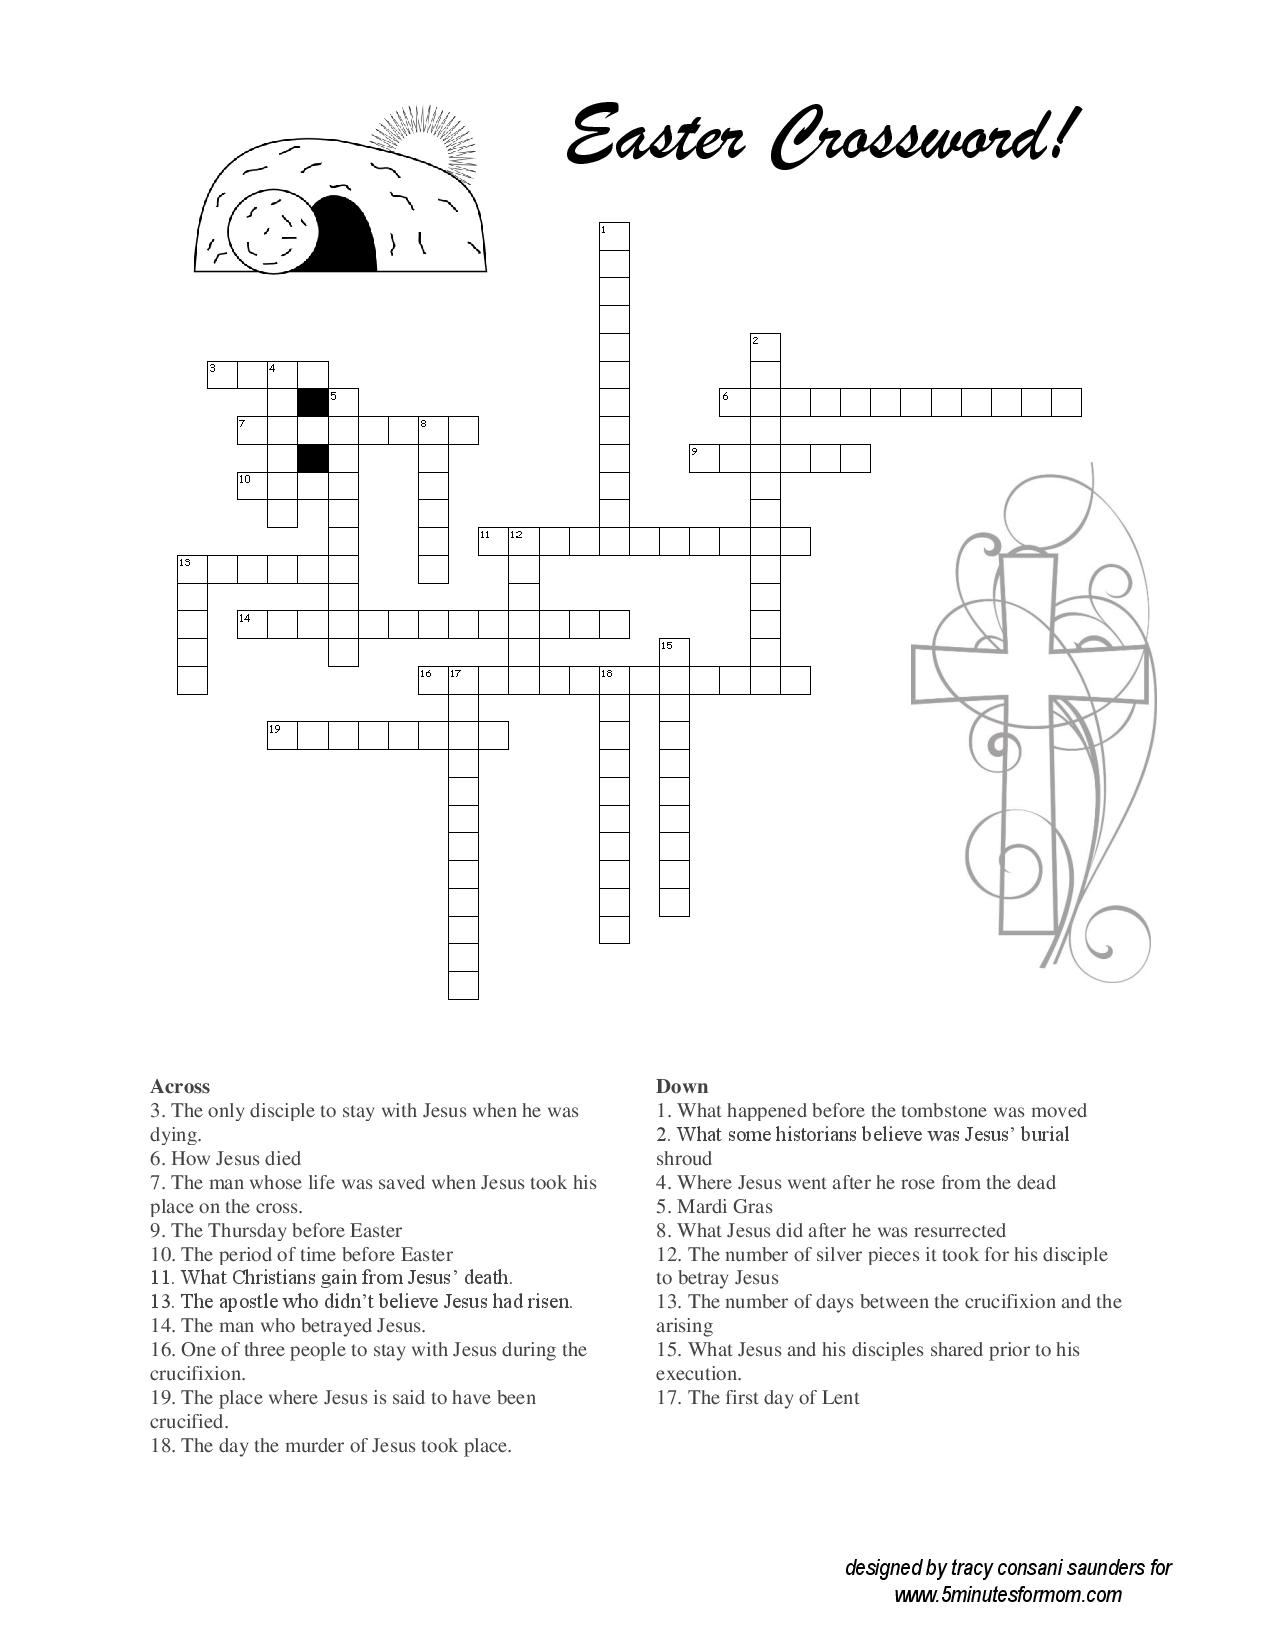 Free Easter Printables For Kids - Coloring Sheets And Crosswords - 5 - Printable Crossword Puzzles For Easter